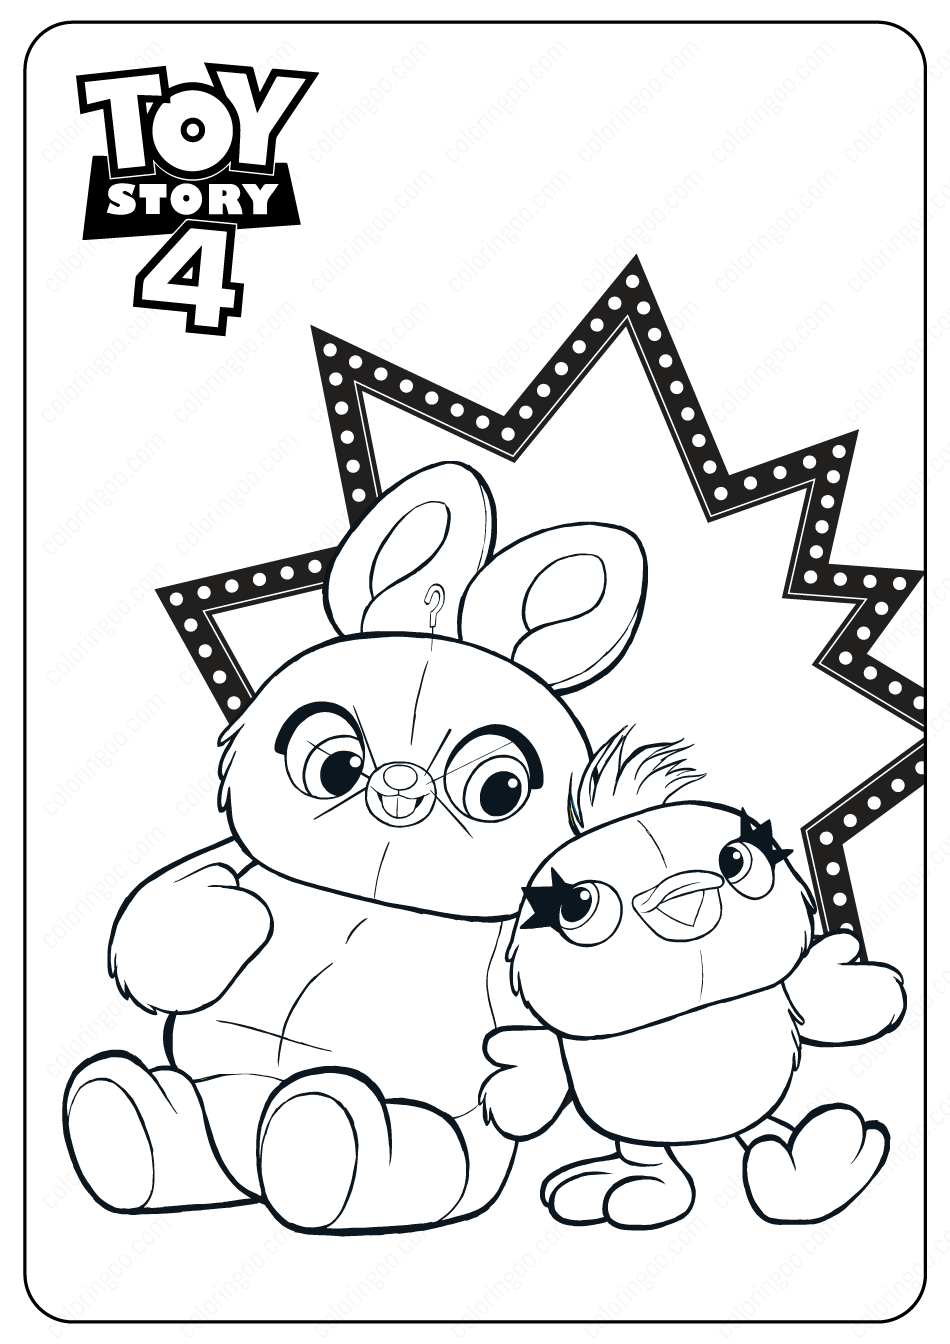 toy story 4 ducky and bunny coloring pages 08